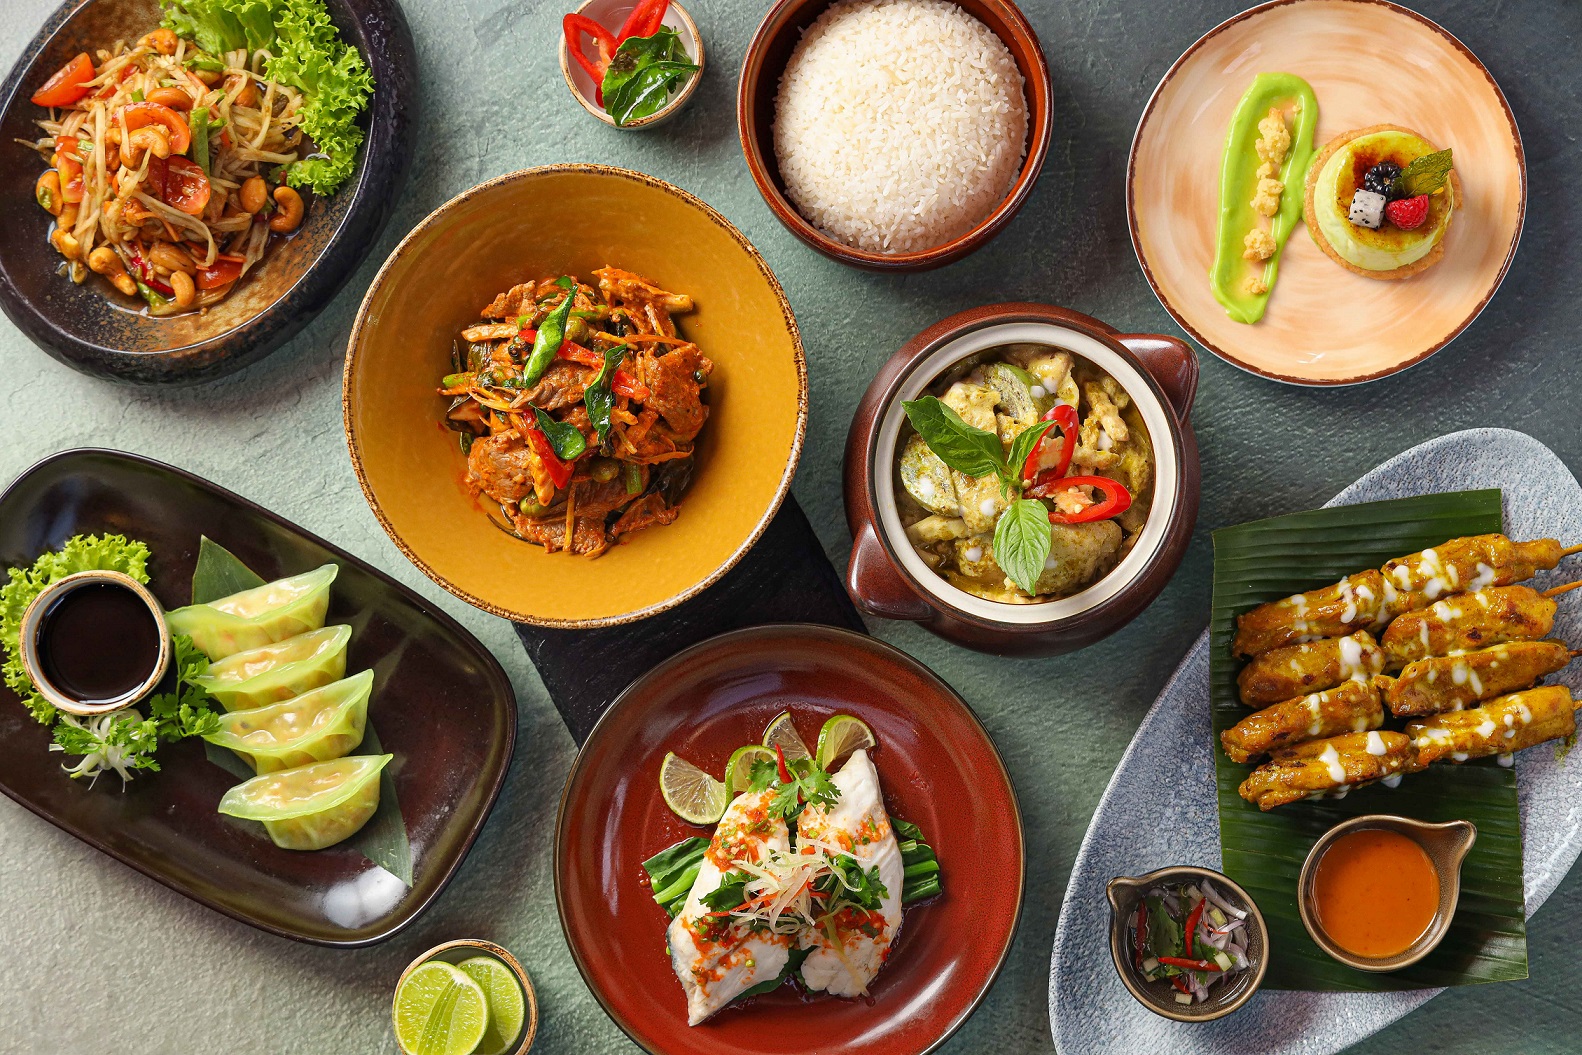 DINING IS HEATING UP AT PAI THAI WITH SPECIAL SIAM SUMMER OFFERING